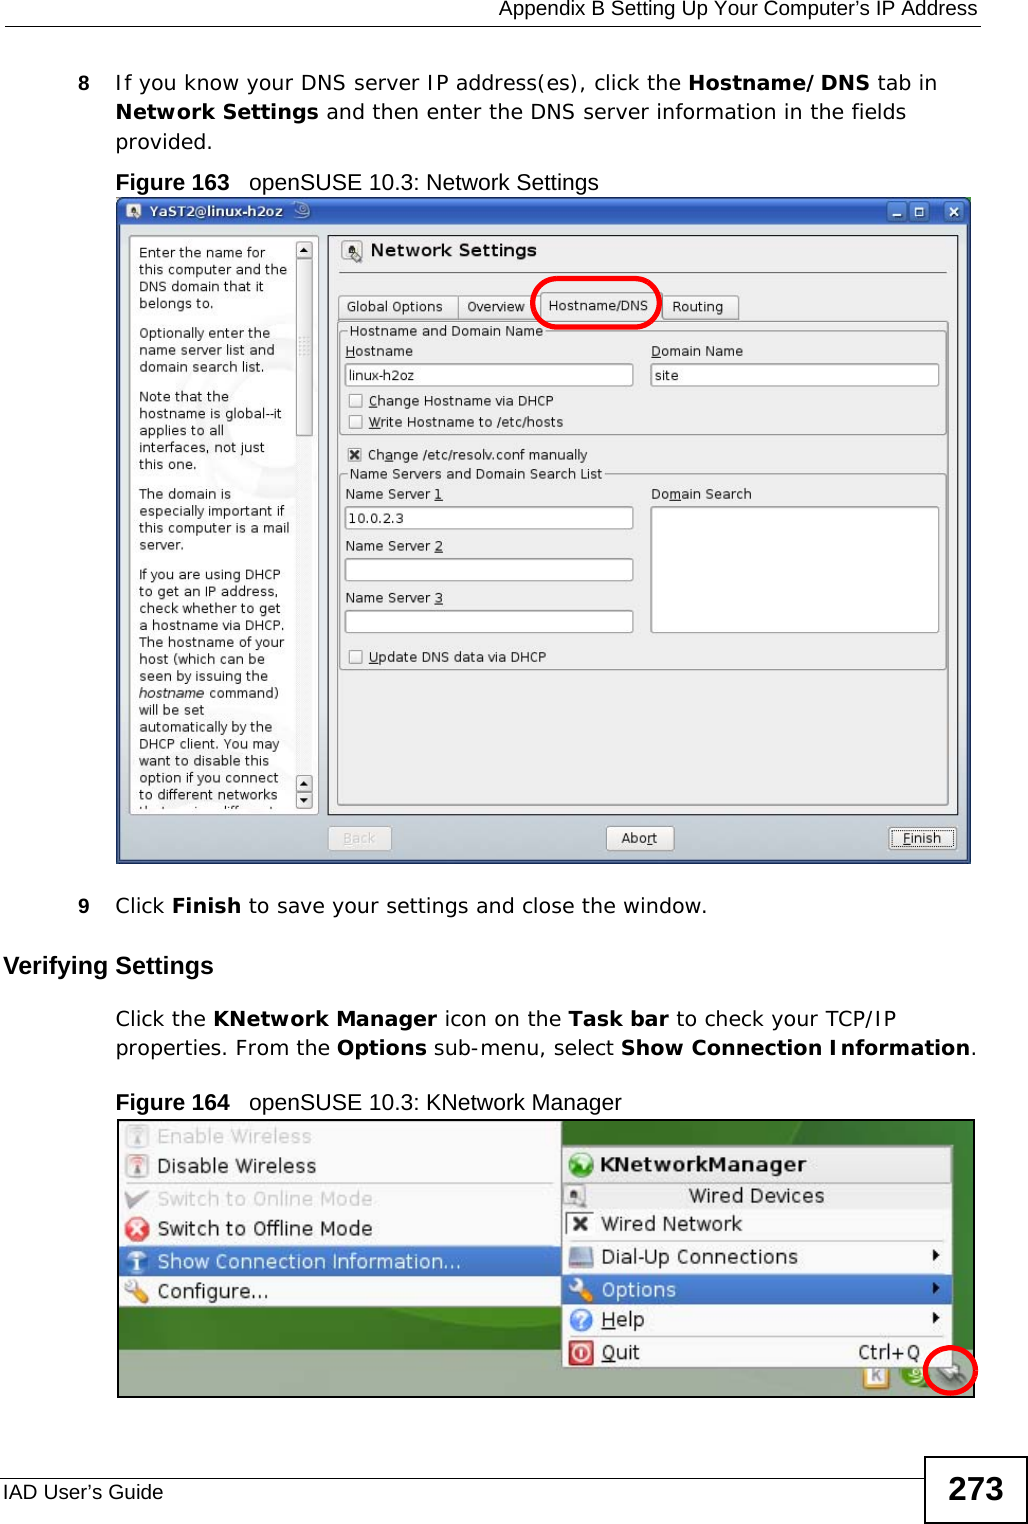  Appendix B Setting Up Your Computer’s IP AddressIAD User’s Guide 2738If you know your DNS server IP address(es), click the Hostname/DNS tab in Network Settings and then enter the DNS server information in the fields provided.Figure 163   openSUSE 10.3: Network Settings9Click Finish to save your settings and close the window.Verifying SettingsClick the KNetwork Manager icon on the Task bar to check your TCP/IP properties. From the Options sub-menu, select Show Connection Information.Figure 164   openSUSE 10.3: KNetwork Manager